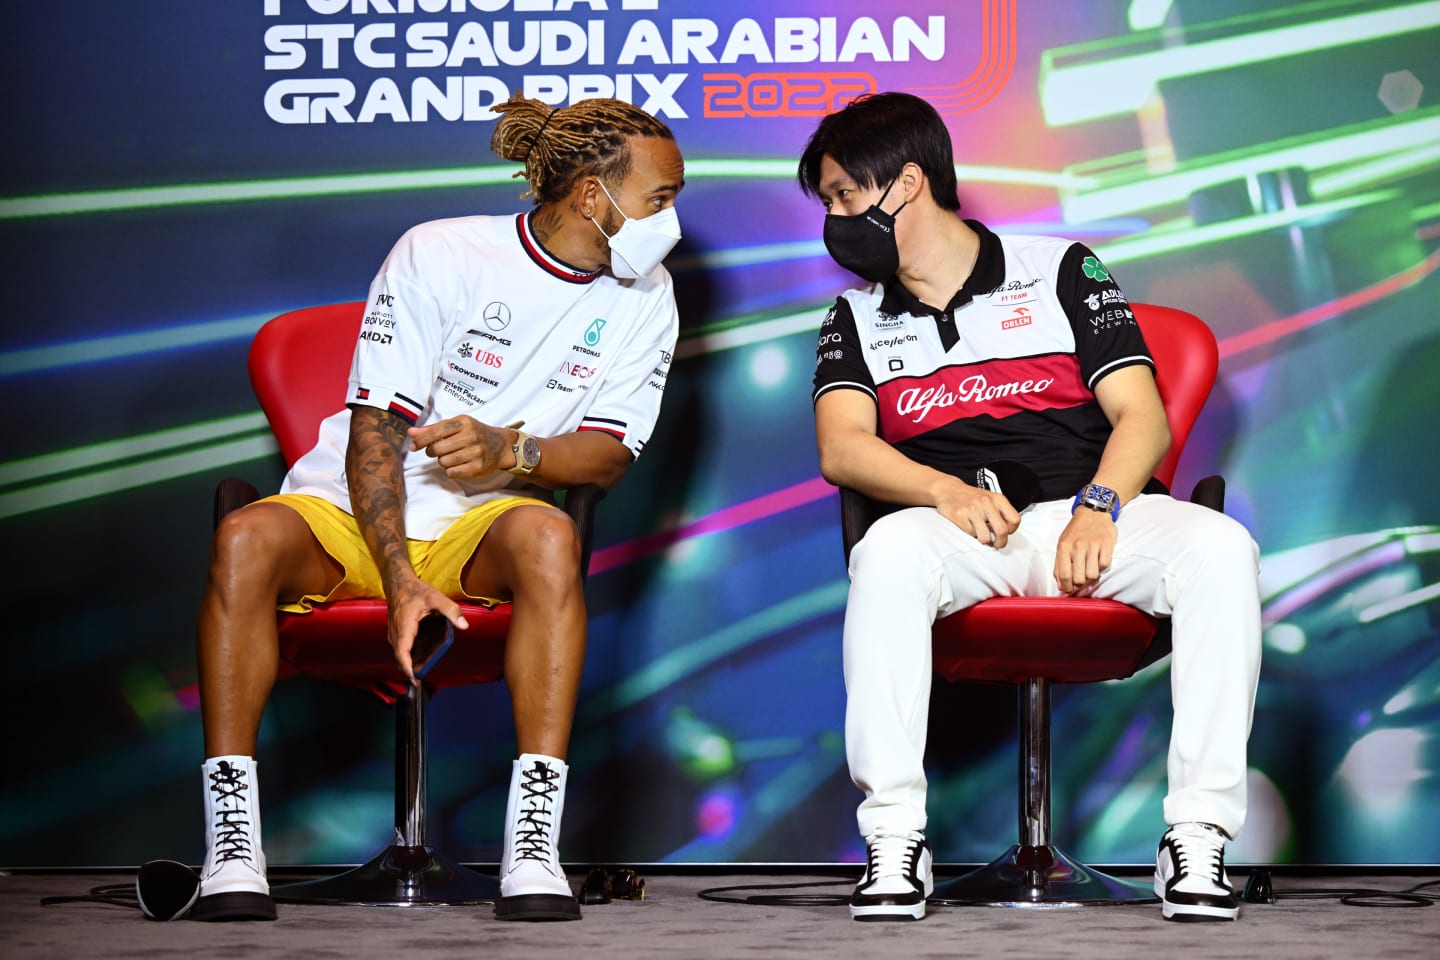 JEDDAH, SAUDI ARABIA - MARCH 25: Lewis Hamilton of Great Britain and Mercedes and Zhou Guanyu of